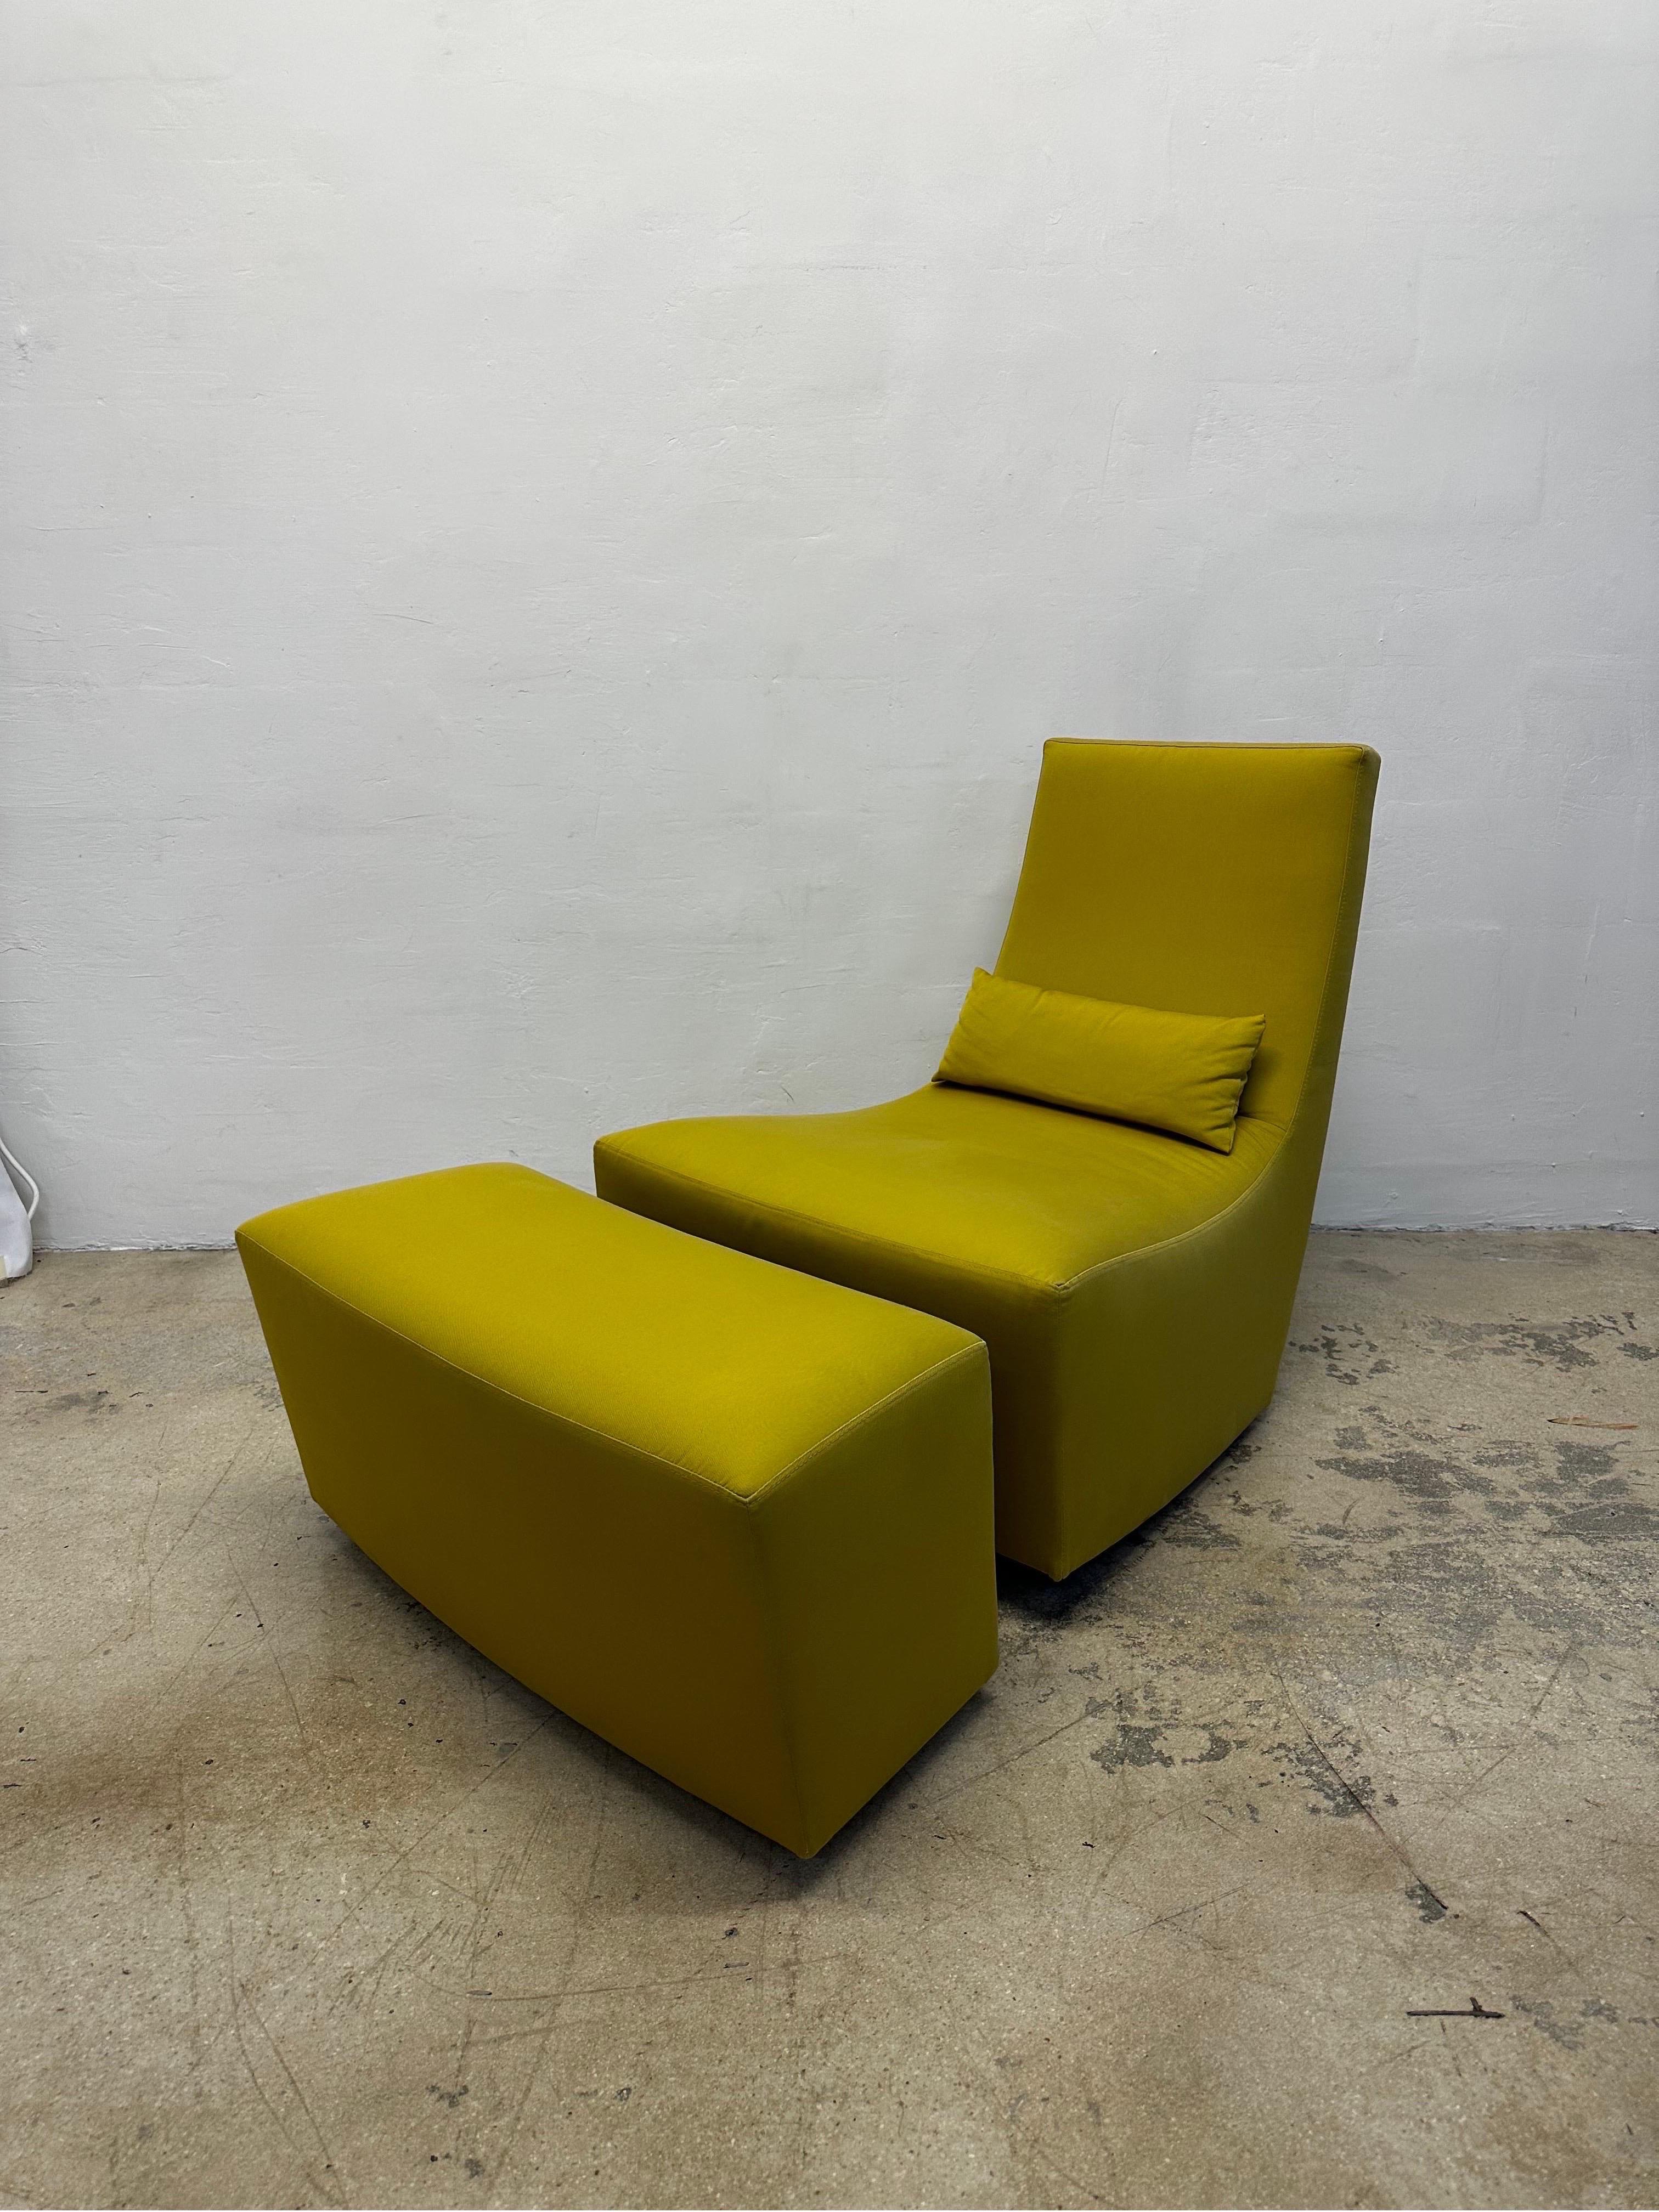 Ligne Roset “Neo” fireside rocking chair and footrest with original canary yellow fabric by Alban-Sebastian Giles .  Use with existing fabric or have reupholstered.

Measurements:
Chair W28” D34.5” H31.5” SH 14.5
Footrest W32” D13.6” H15”